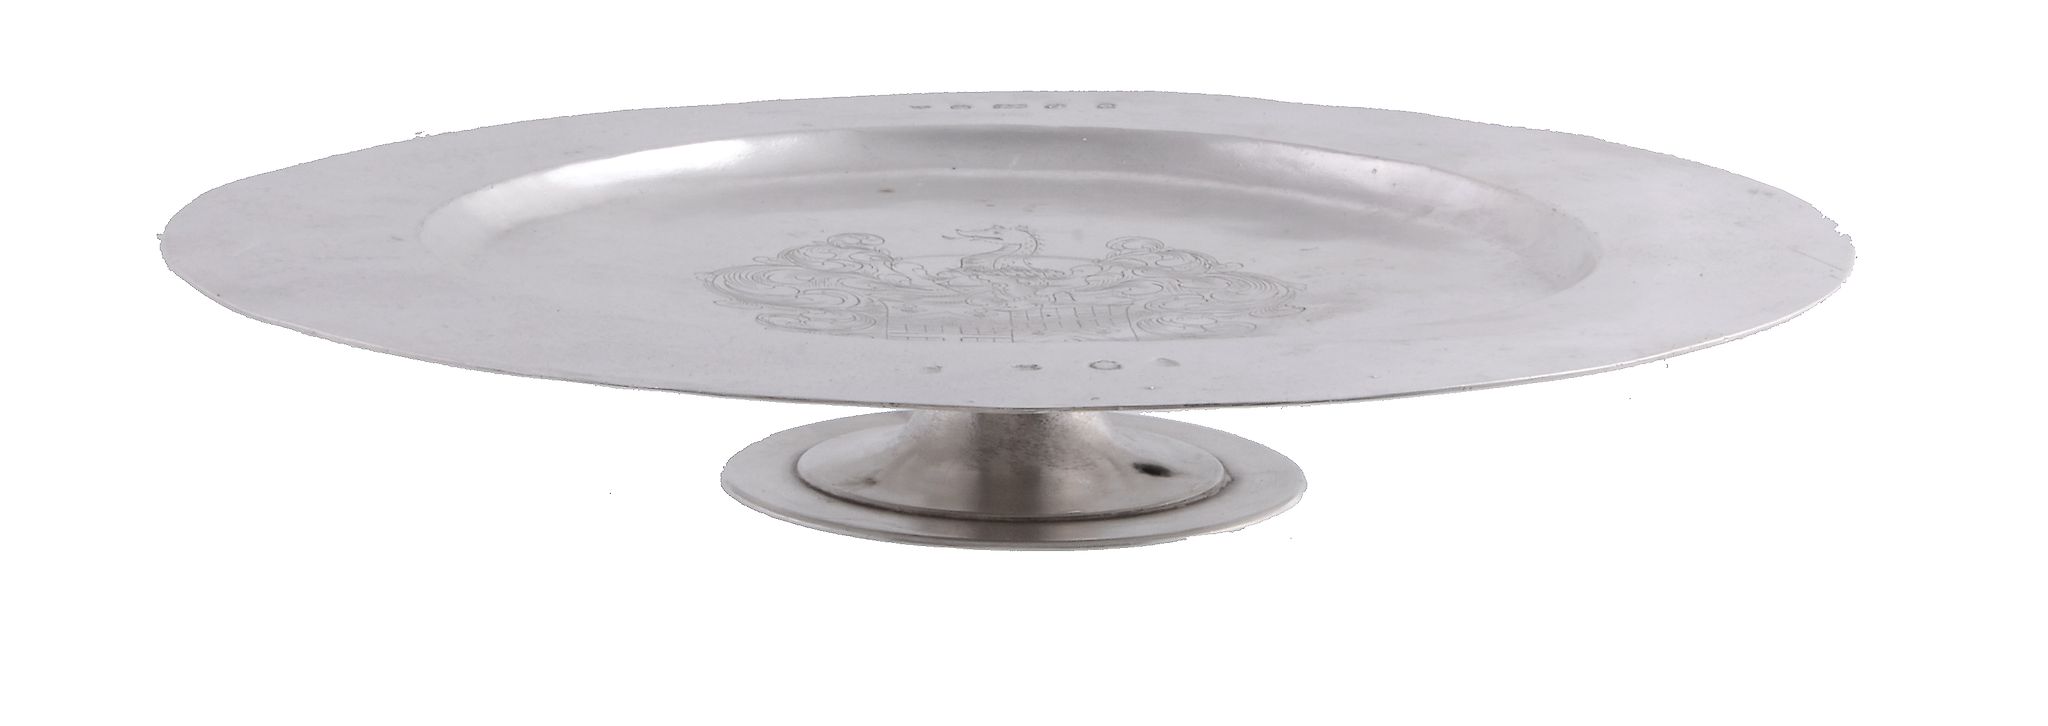 A silver footed salver by Friends of St George Anniversary Sales Ltd, London 1977, cast from 17th